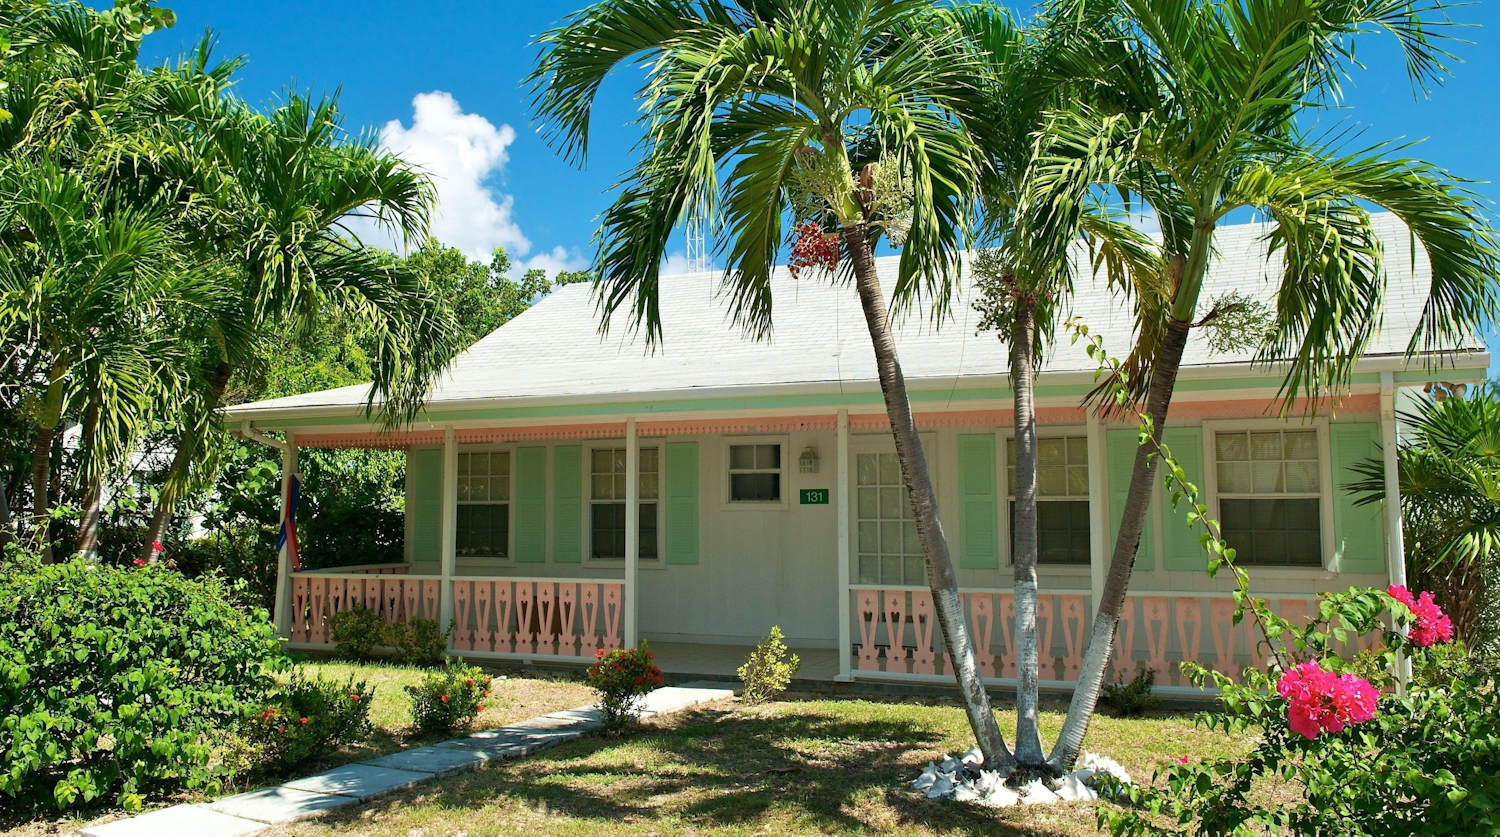 Quaint mint green traditional cayman cottage with veranda and pink blossom trees